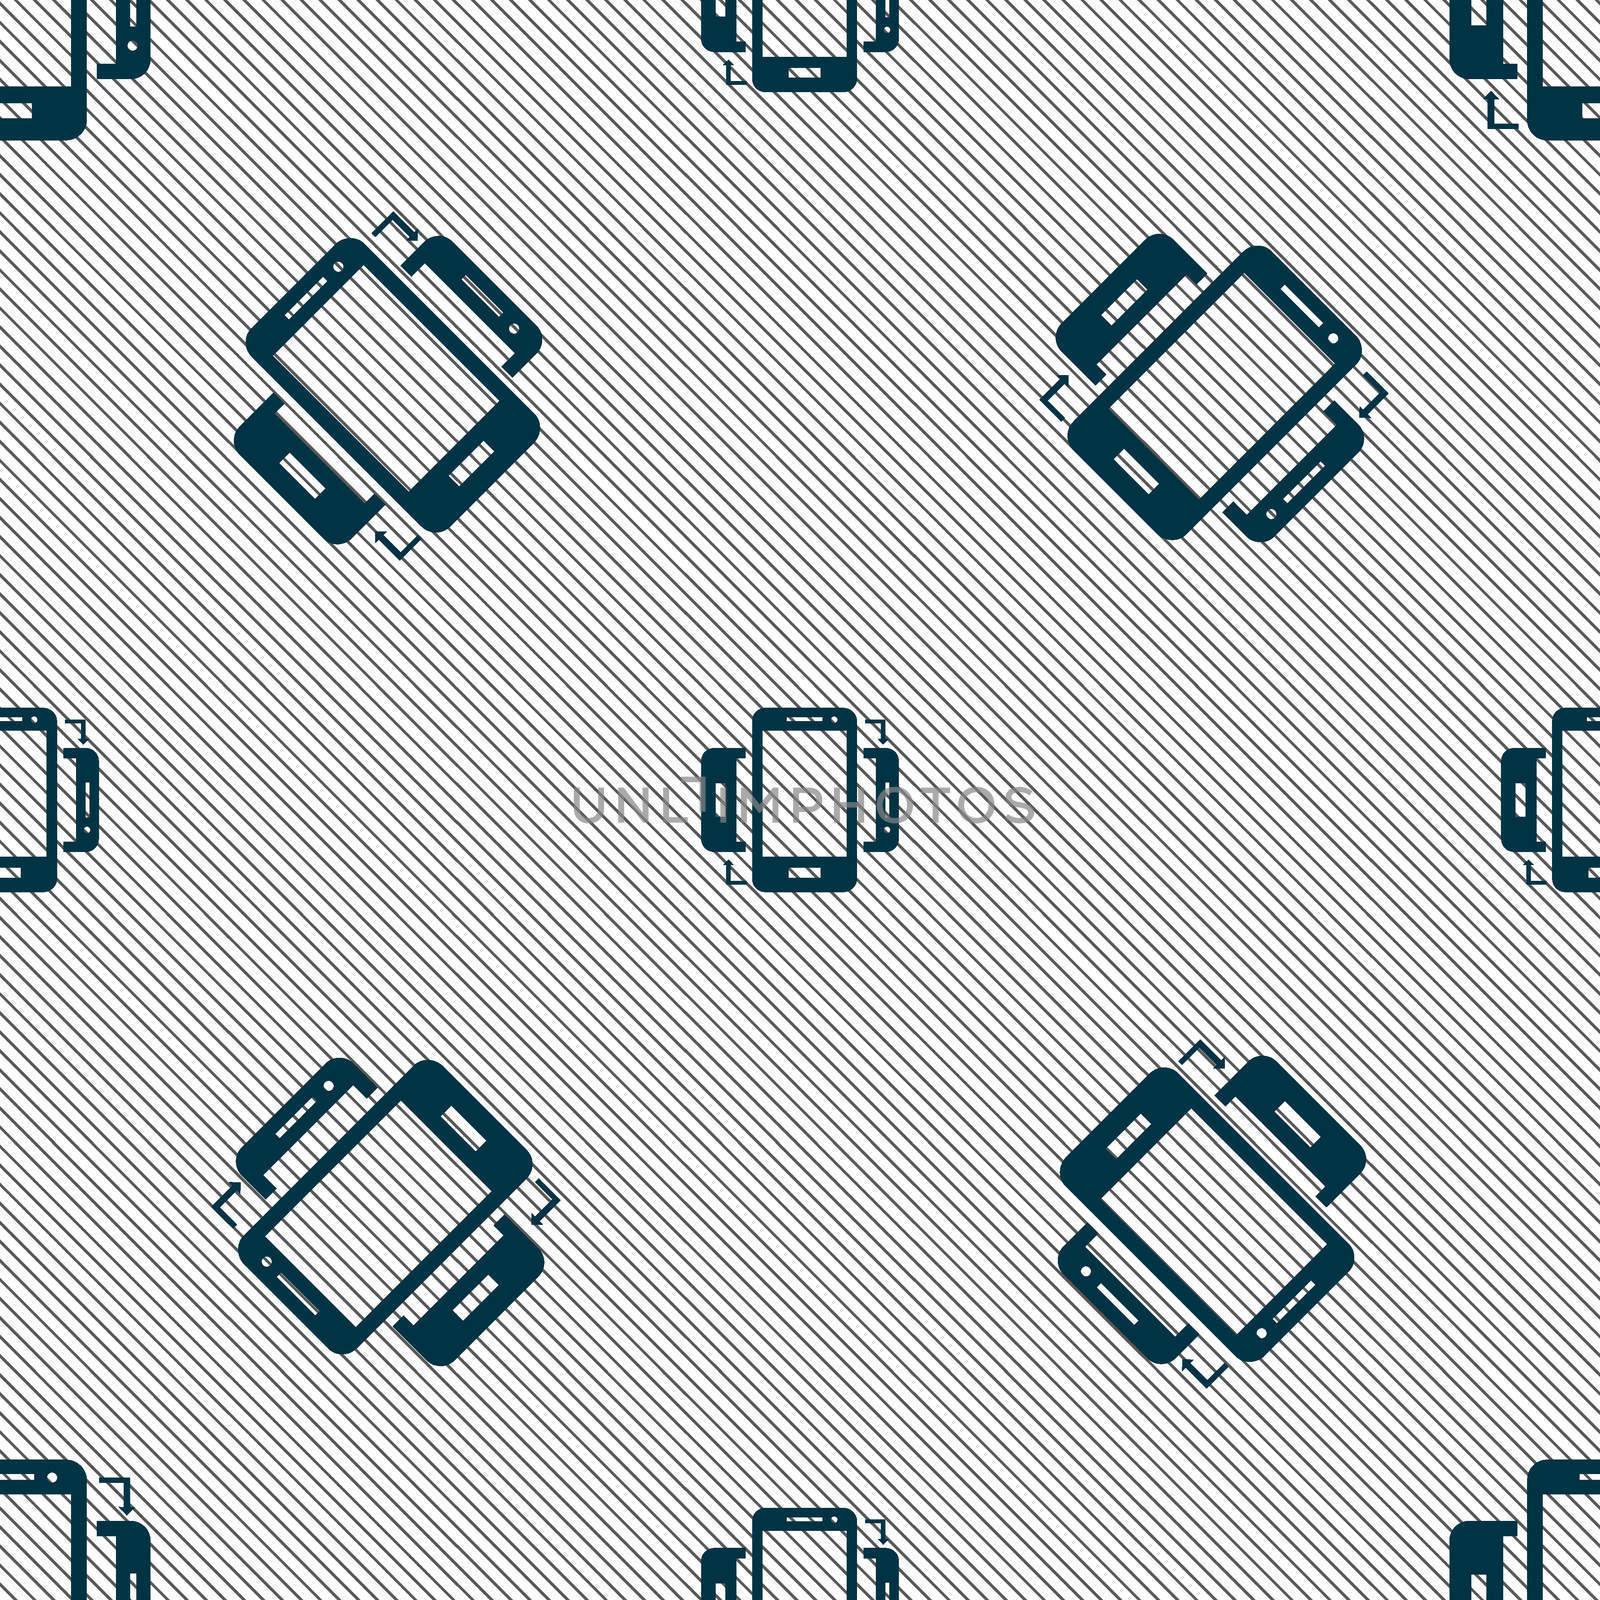 Synchronization sign icon. smartphones sync symbol. Data exchange. Seamless pattern with geometric texture. illustration